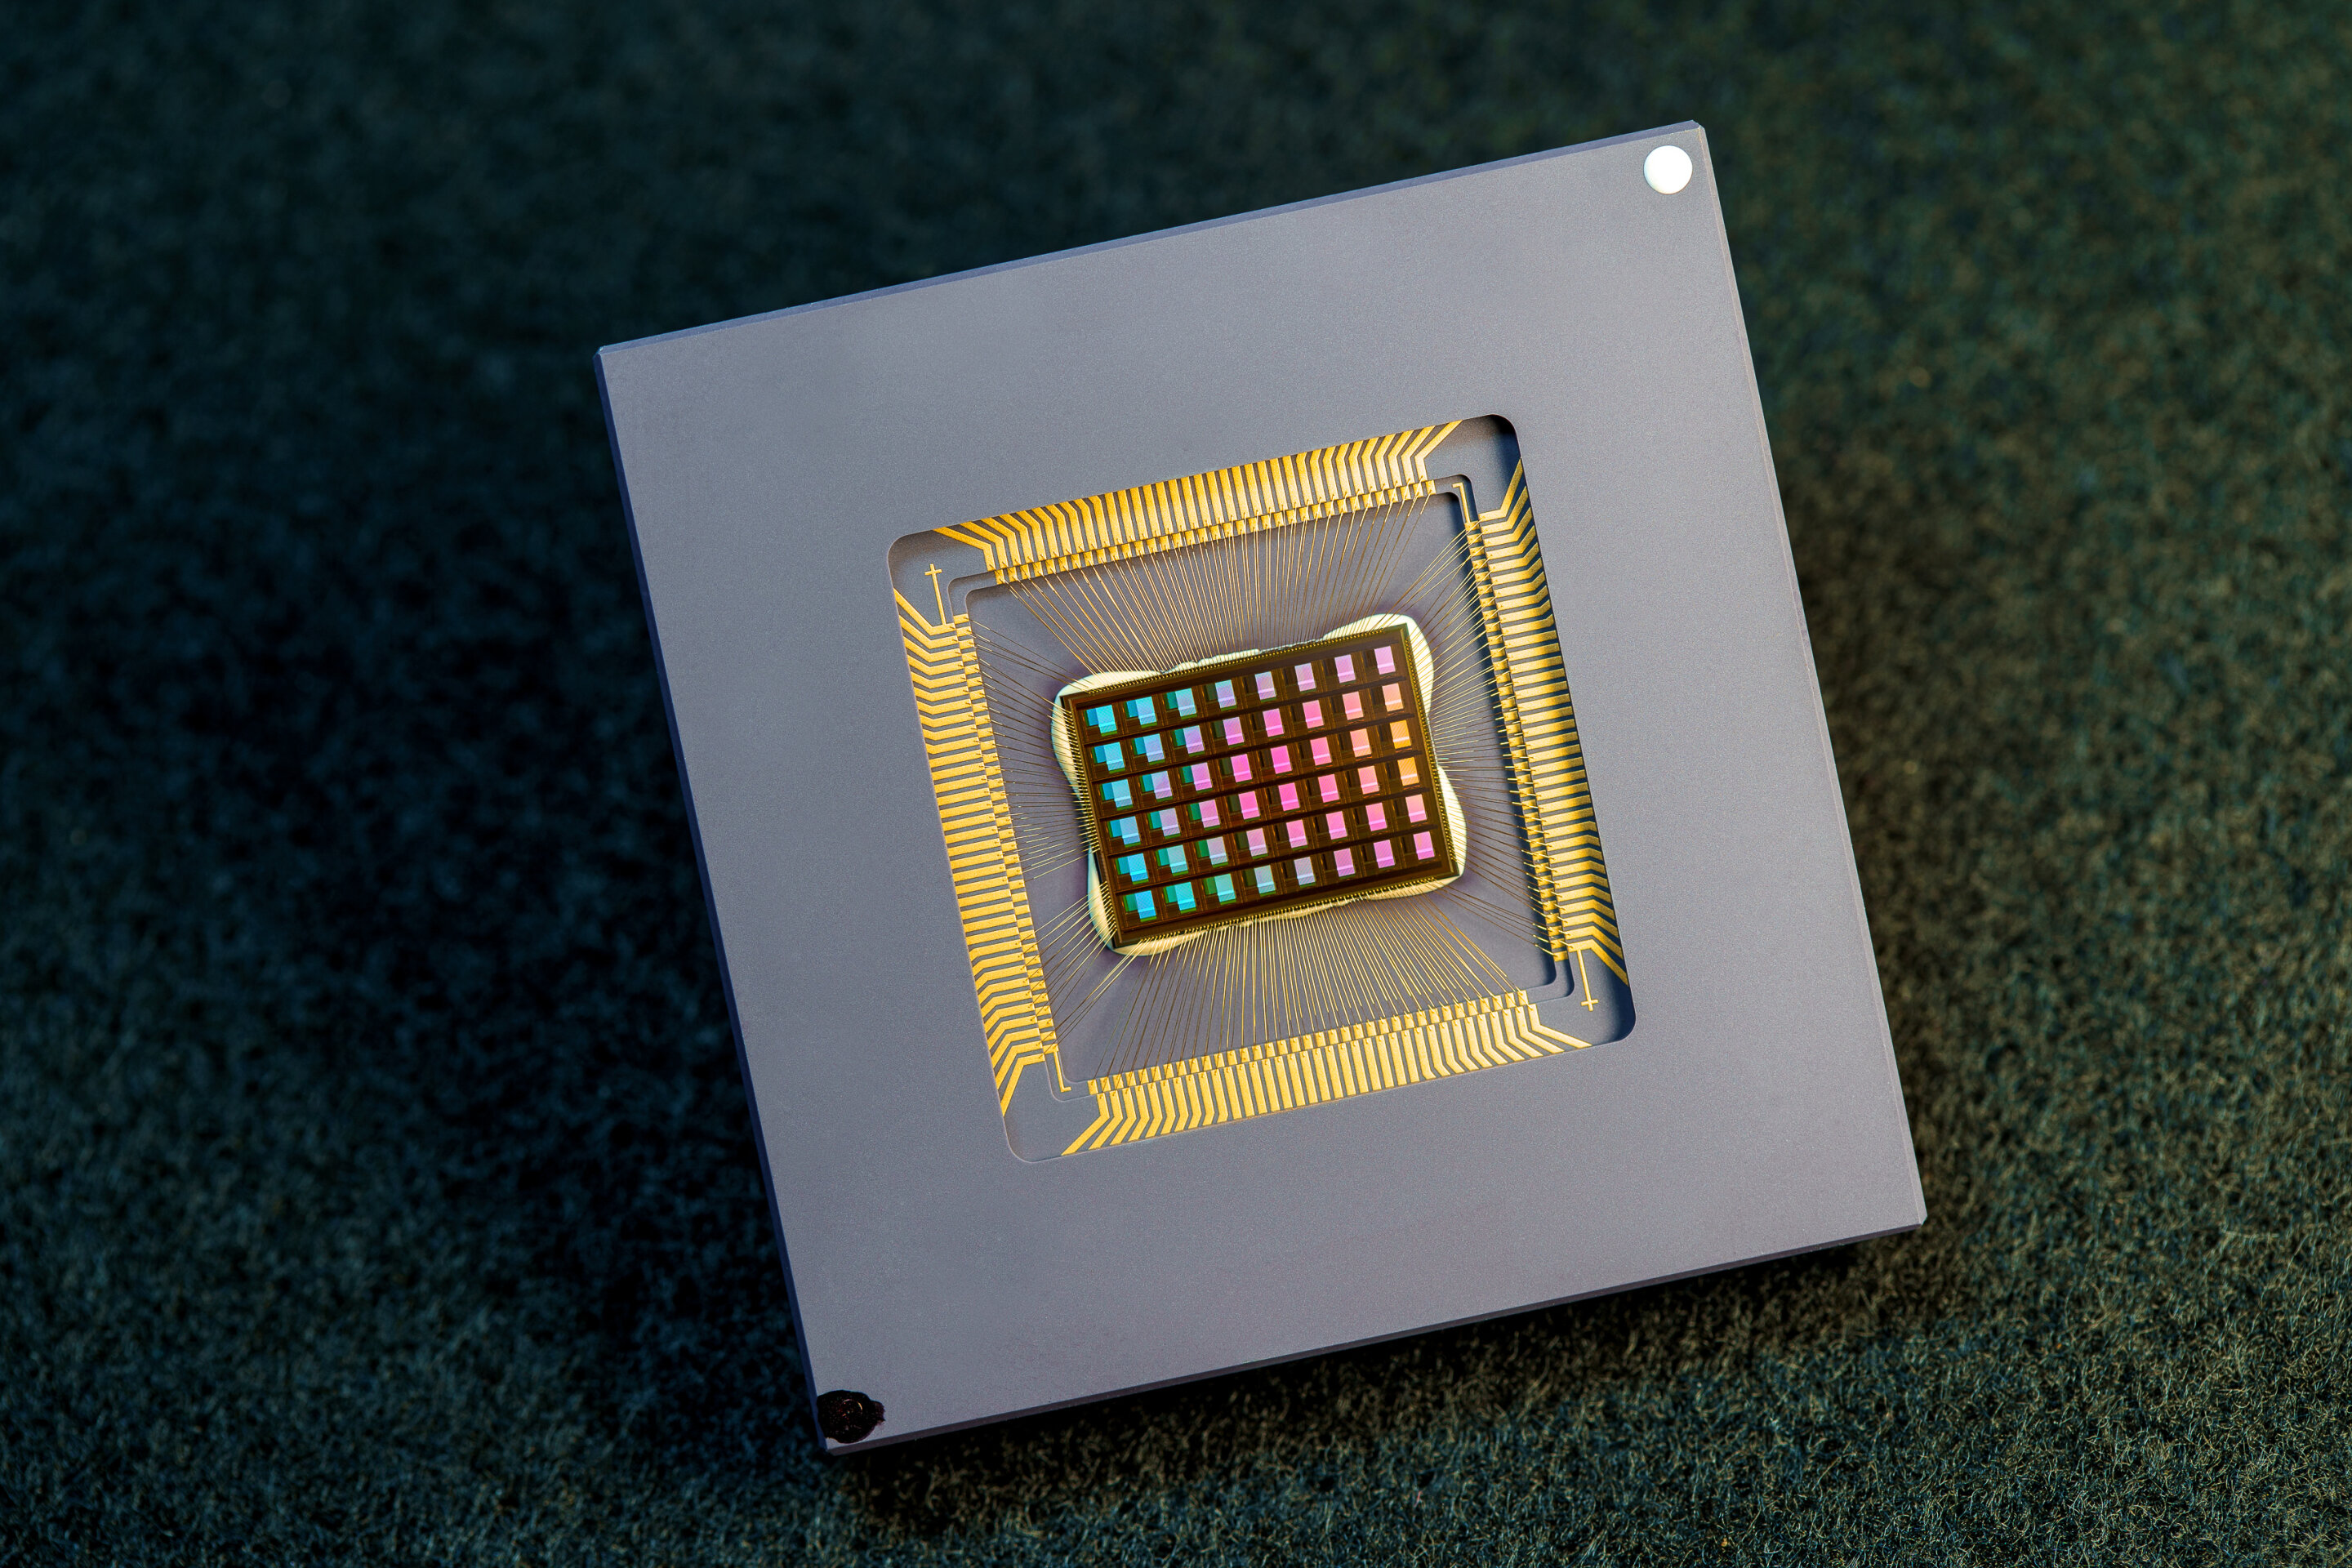 New neuromorphic chip for AI on the edge, at a small fraction of the energy and size of today’s computing platforms